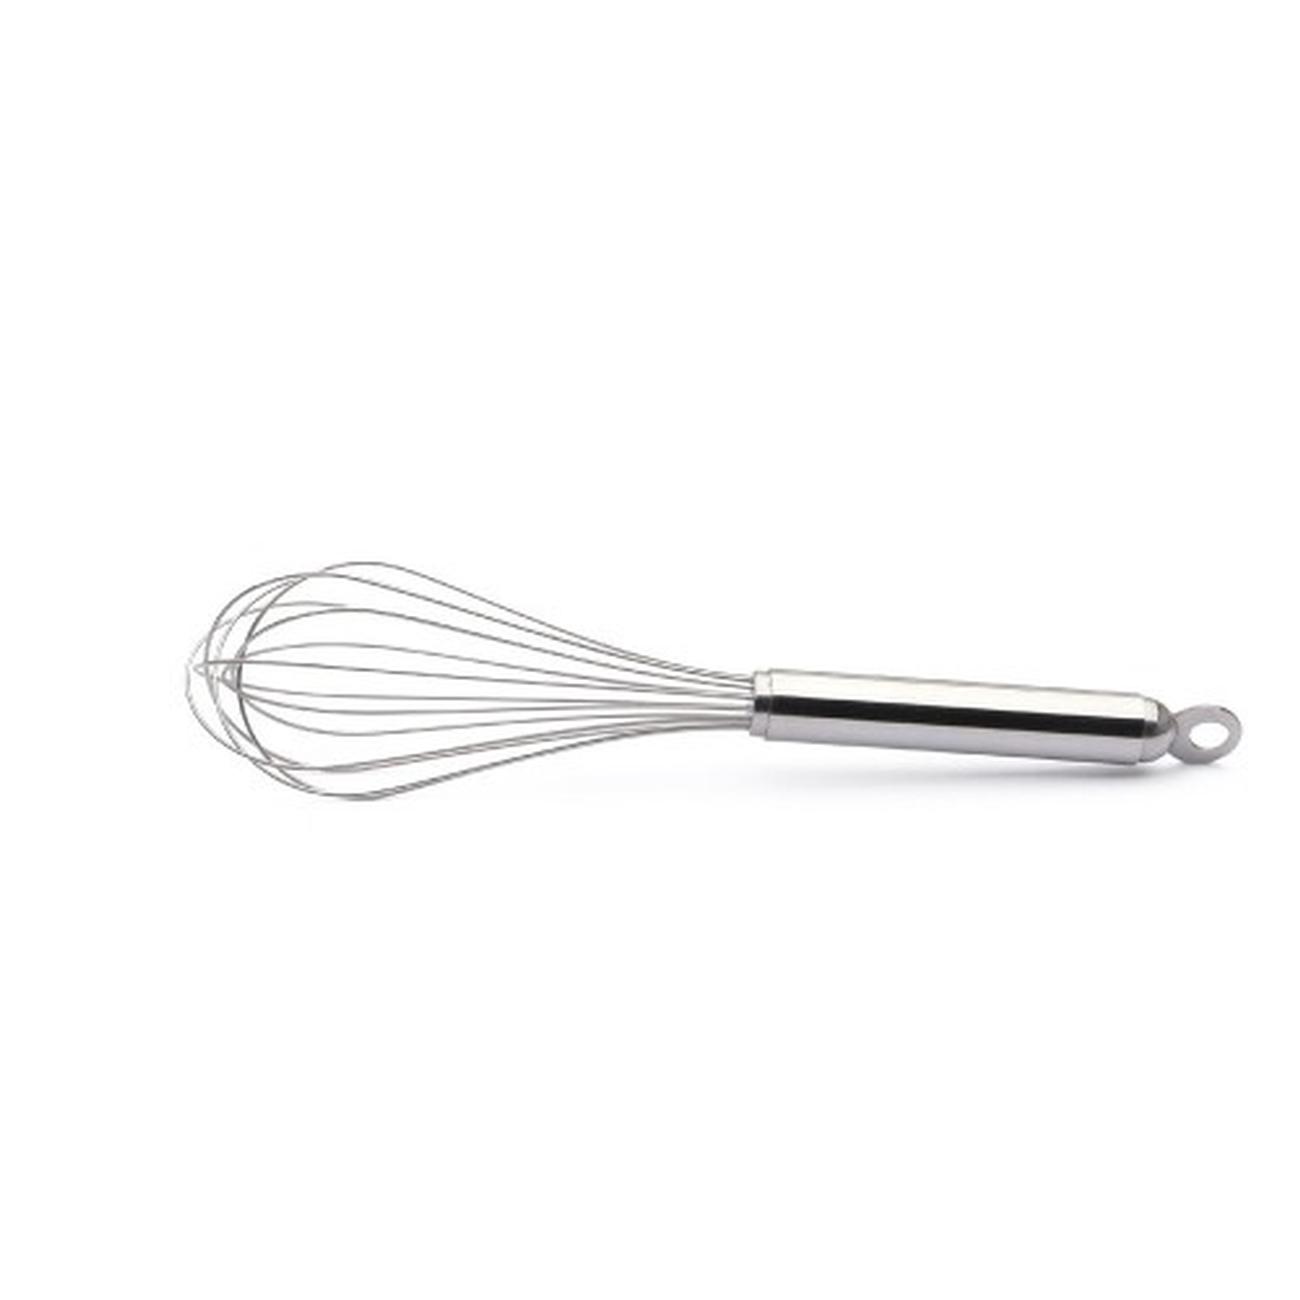 weis-stainless-steel-whisk-25cm - Stainless Steel Kitchen Whisk 25cm